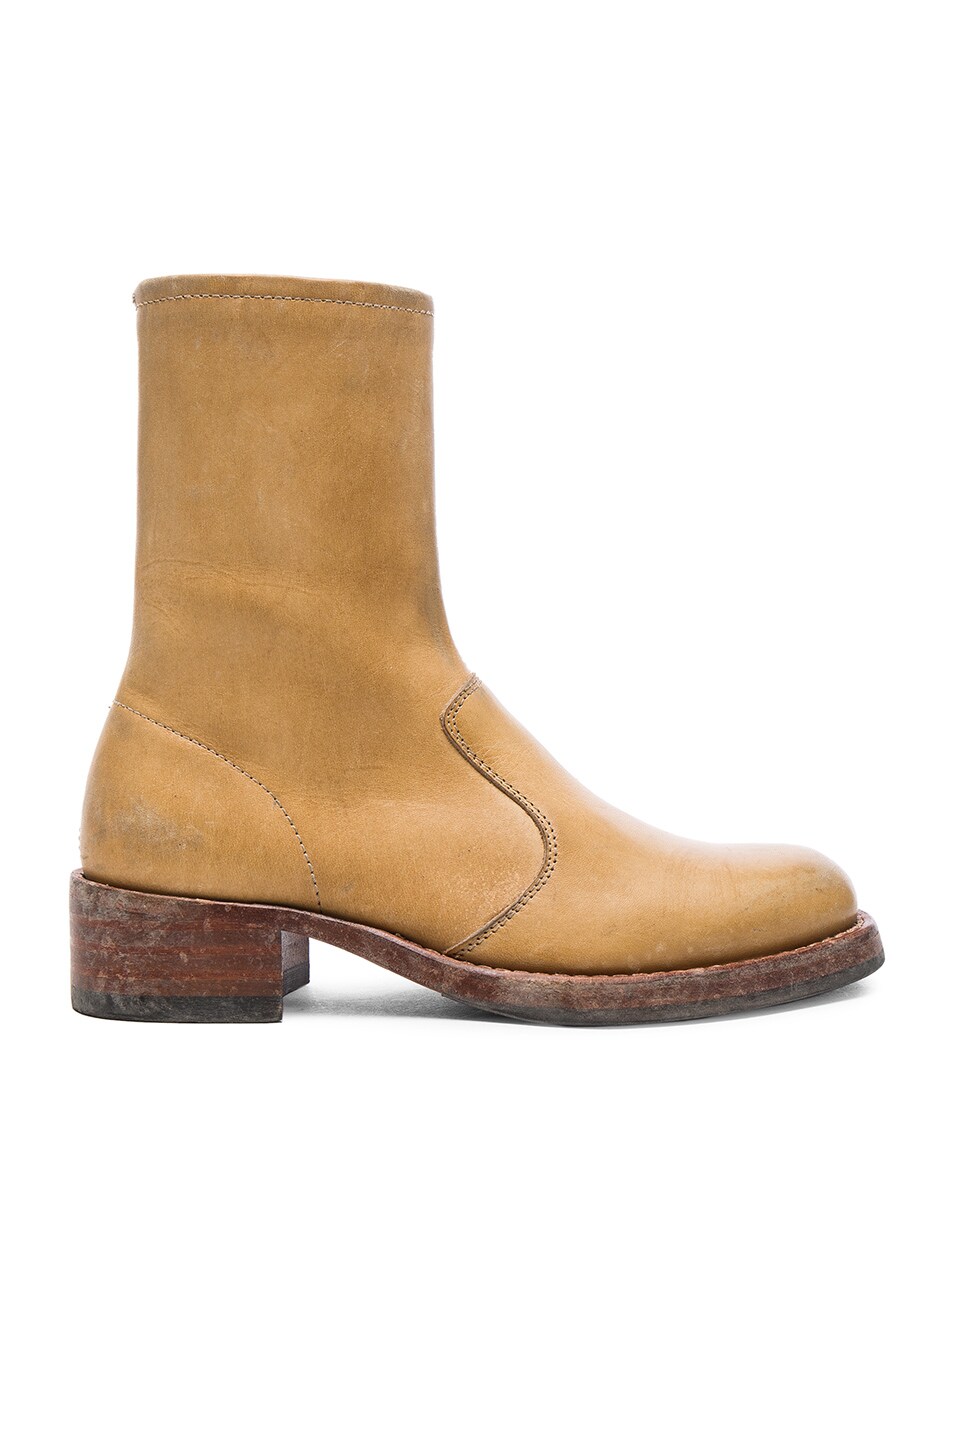 Image 1 of Maison Margiela Leather Replica Boots in Camel